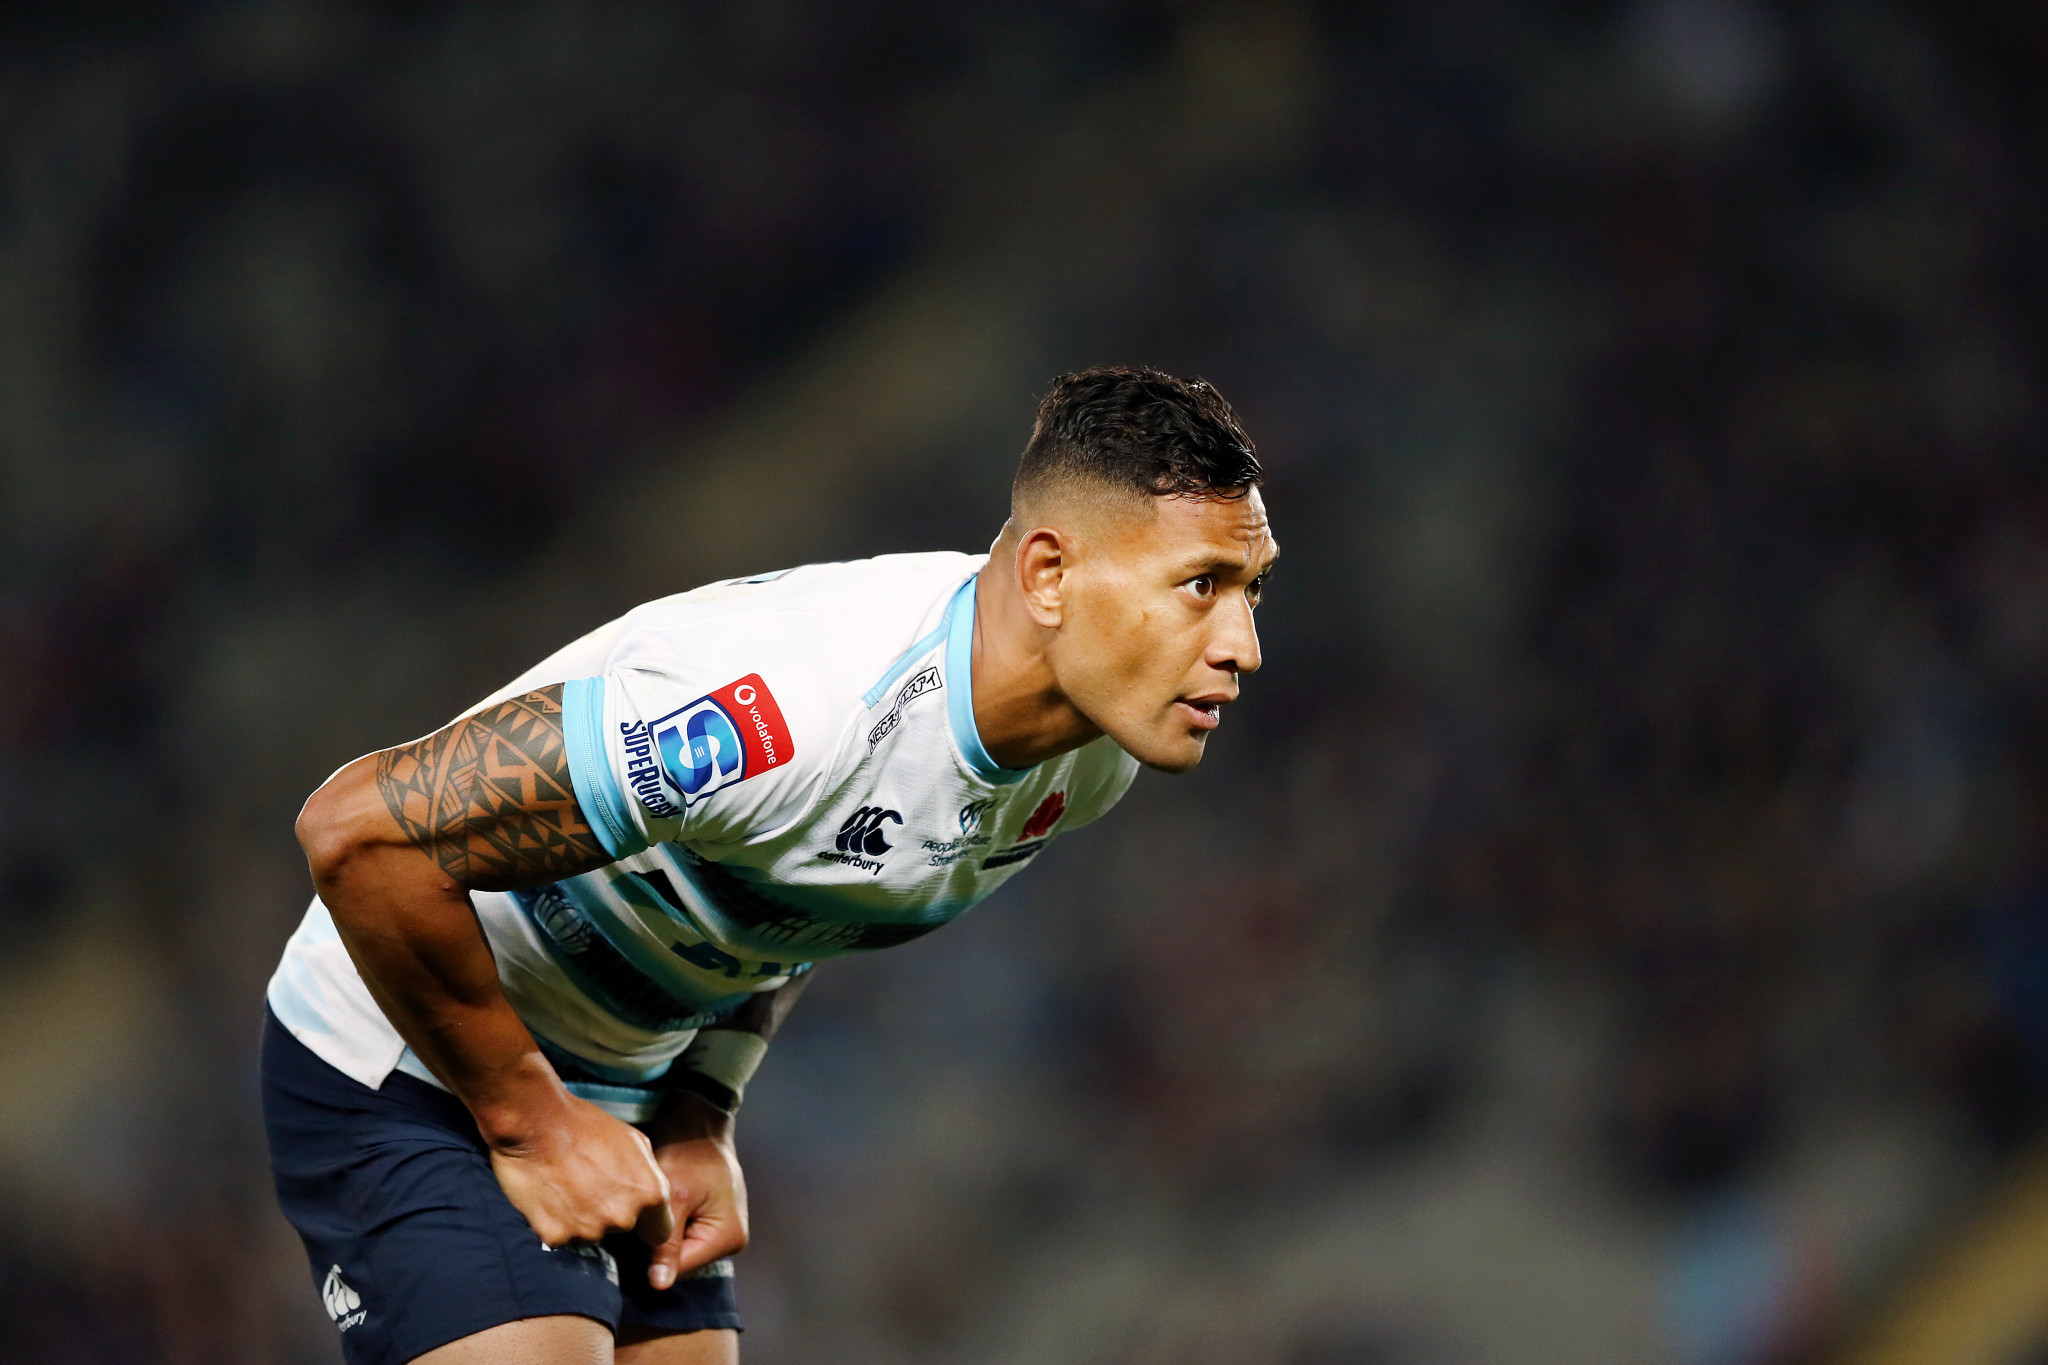 Israel Folau is reportedly preparing legal action against Rugby Australia following his sacking for social media posts ©Getty Images